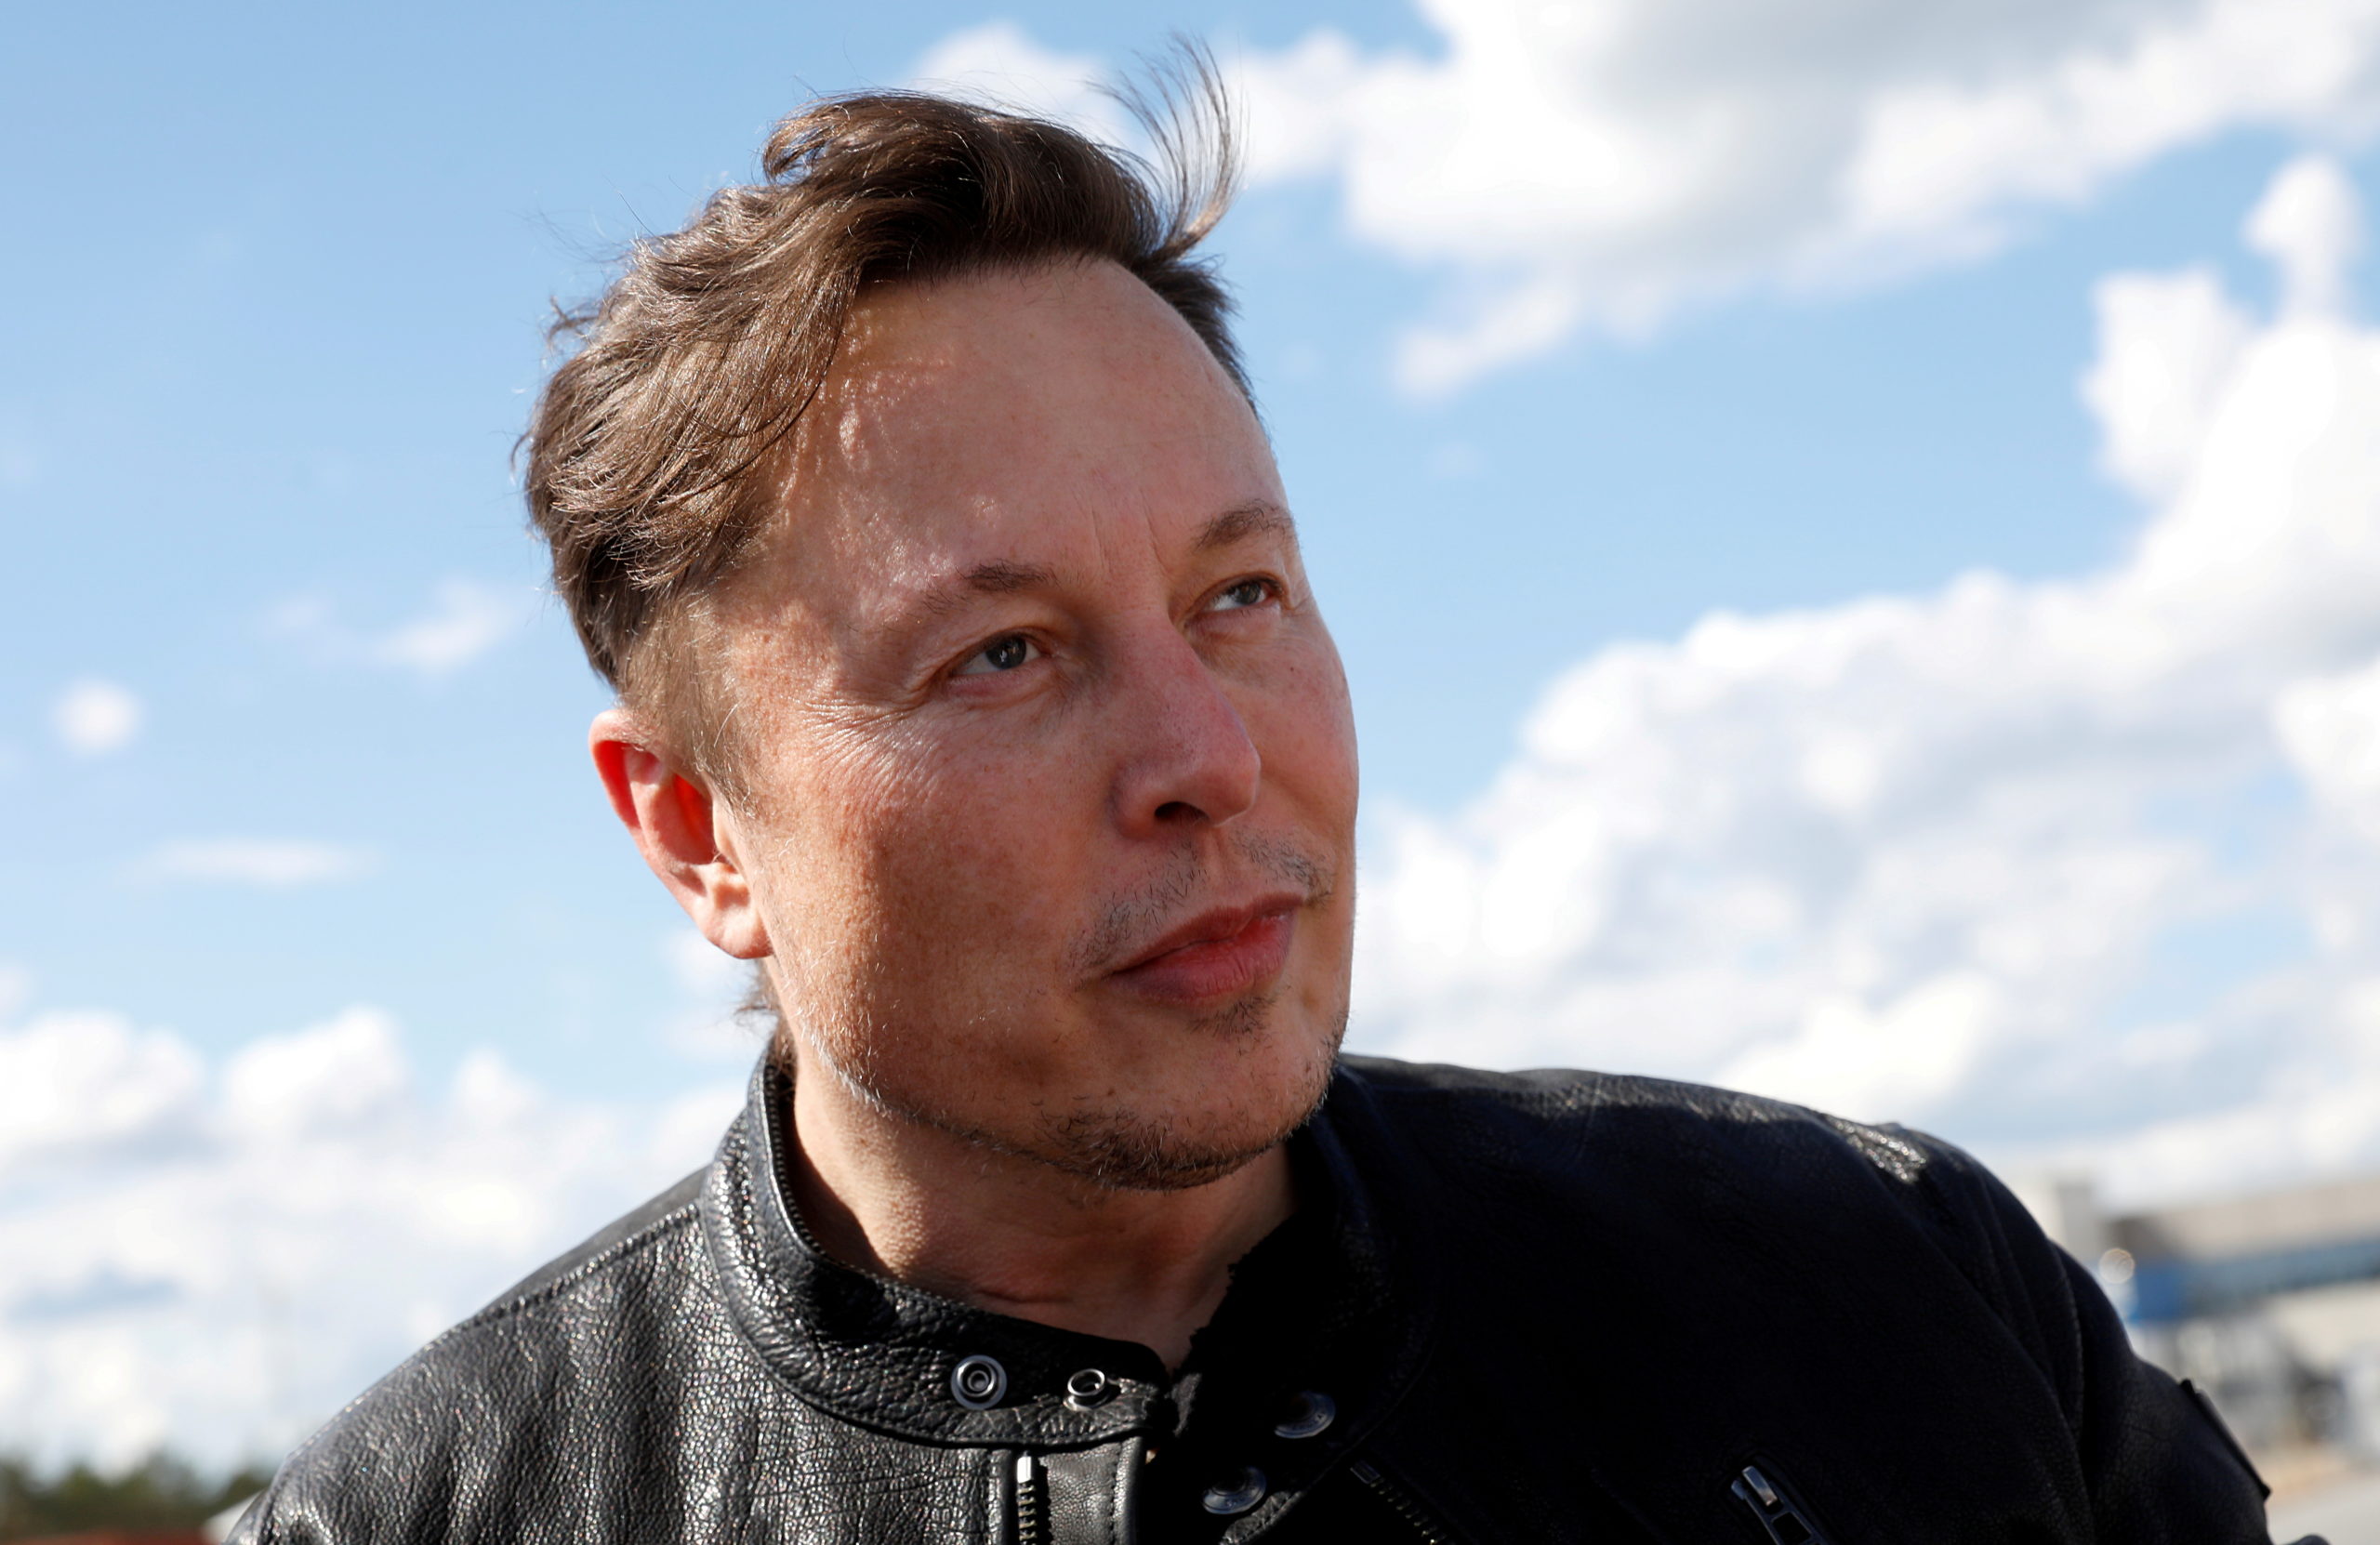 Tesla's Musk sells 639,737 more shares after Twitter poll